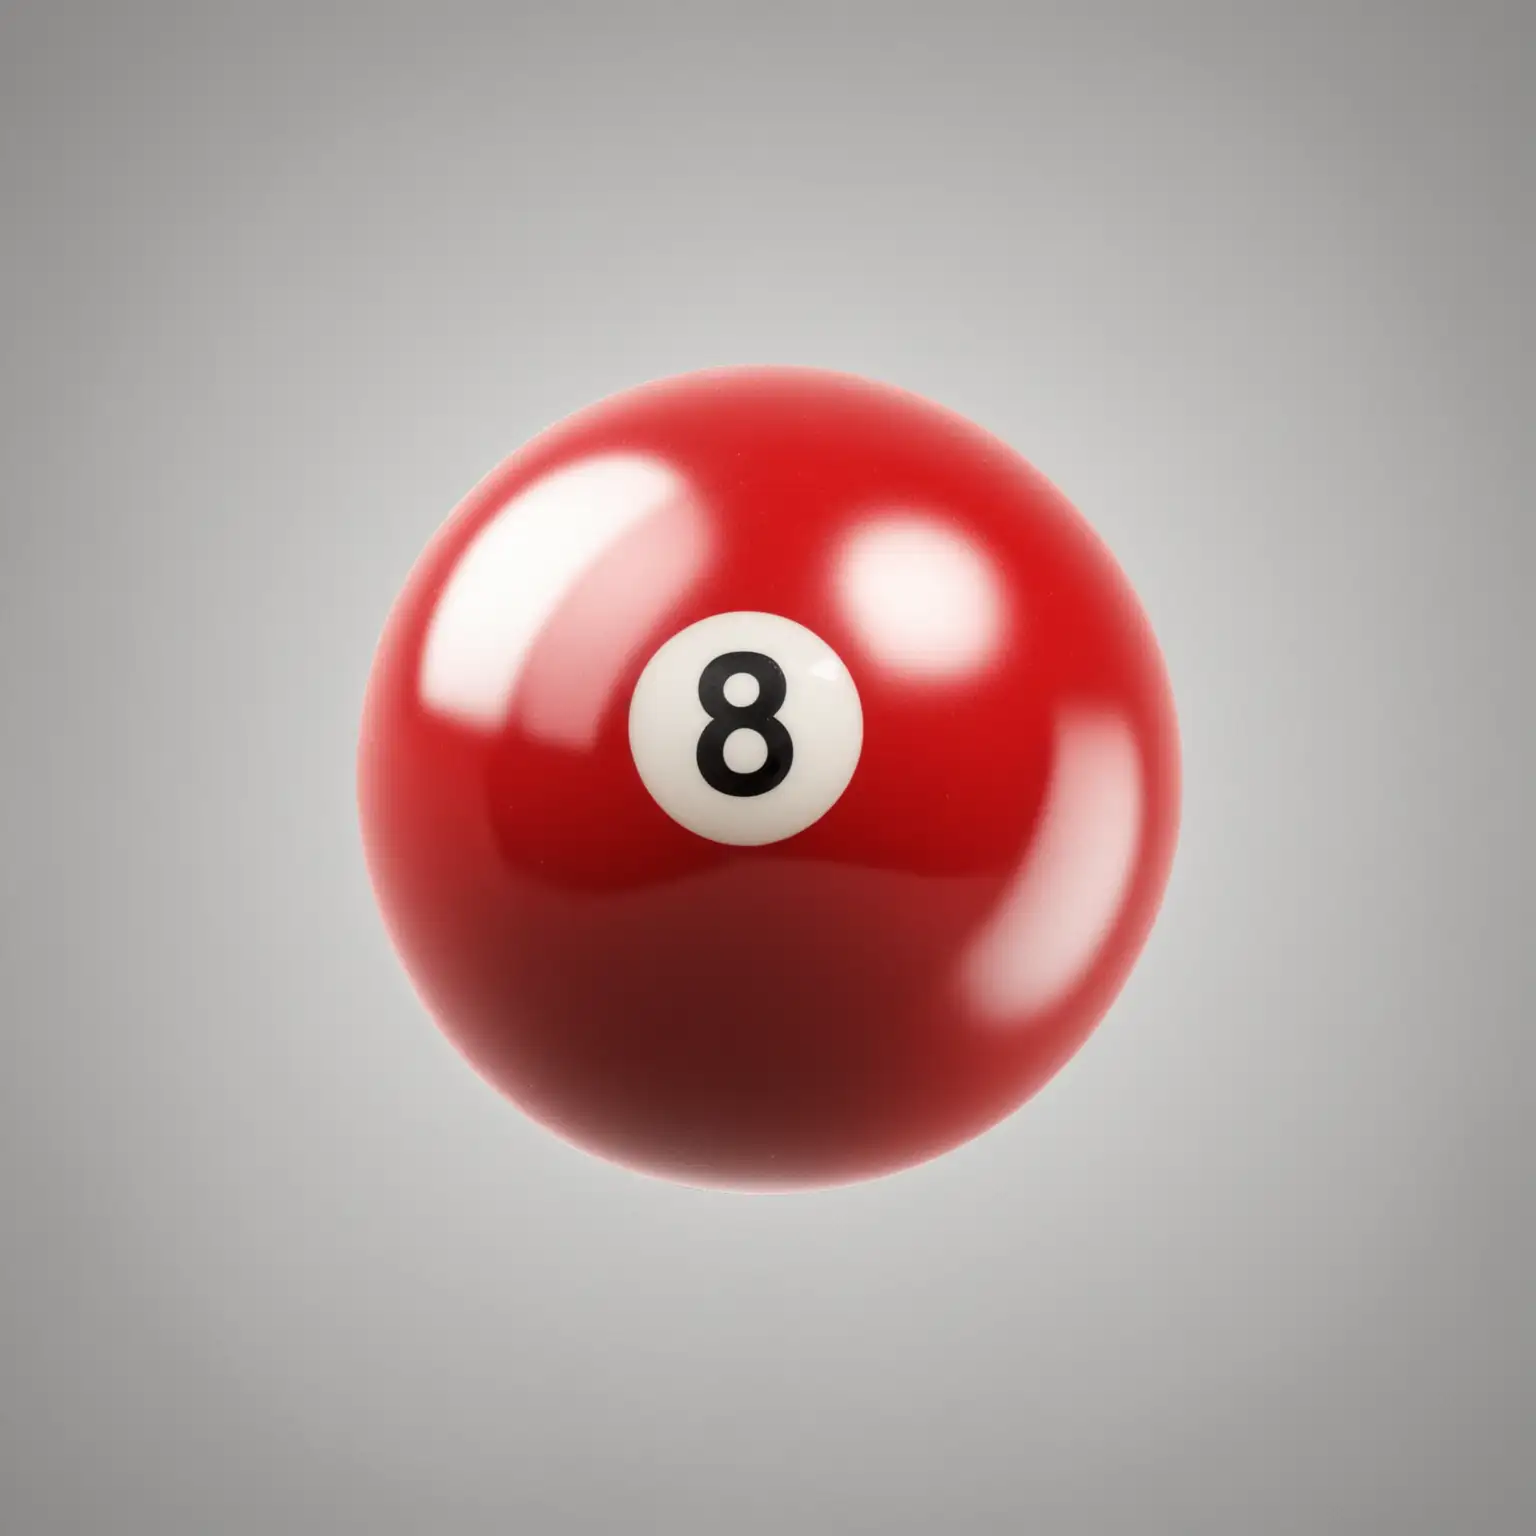 Hyper Realistic Red Billiard Ball Floating Isolated on White Background